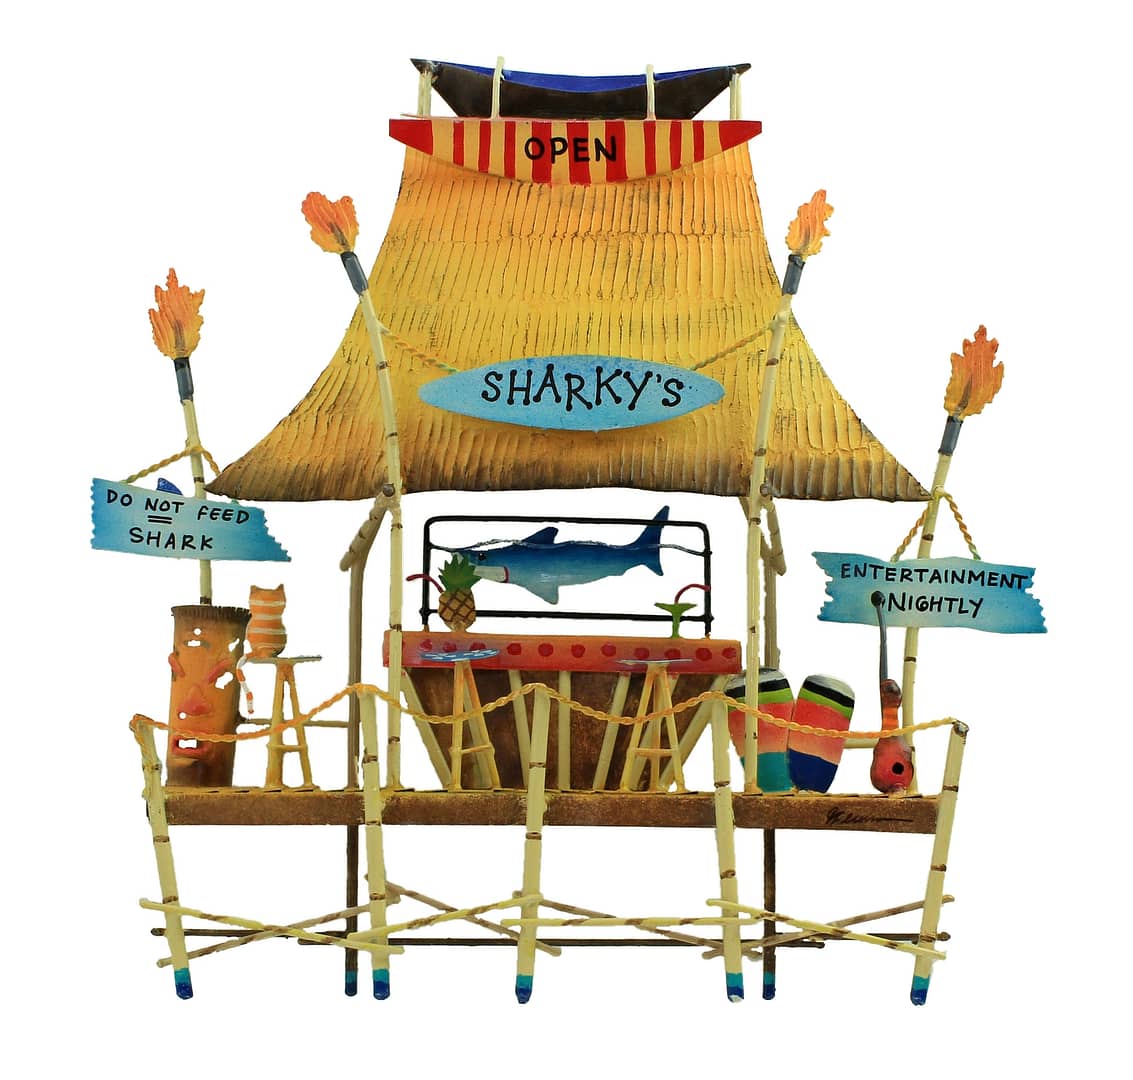 16"L Metal Sharky's Bar and Grill Wall Decor